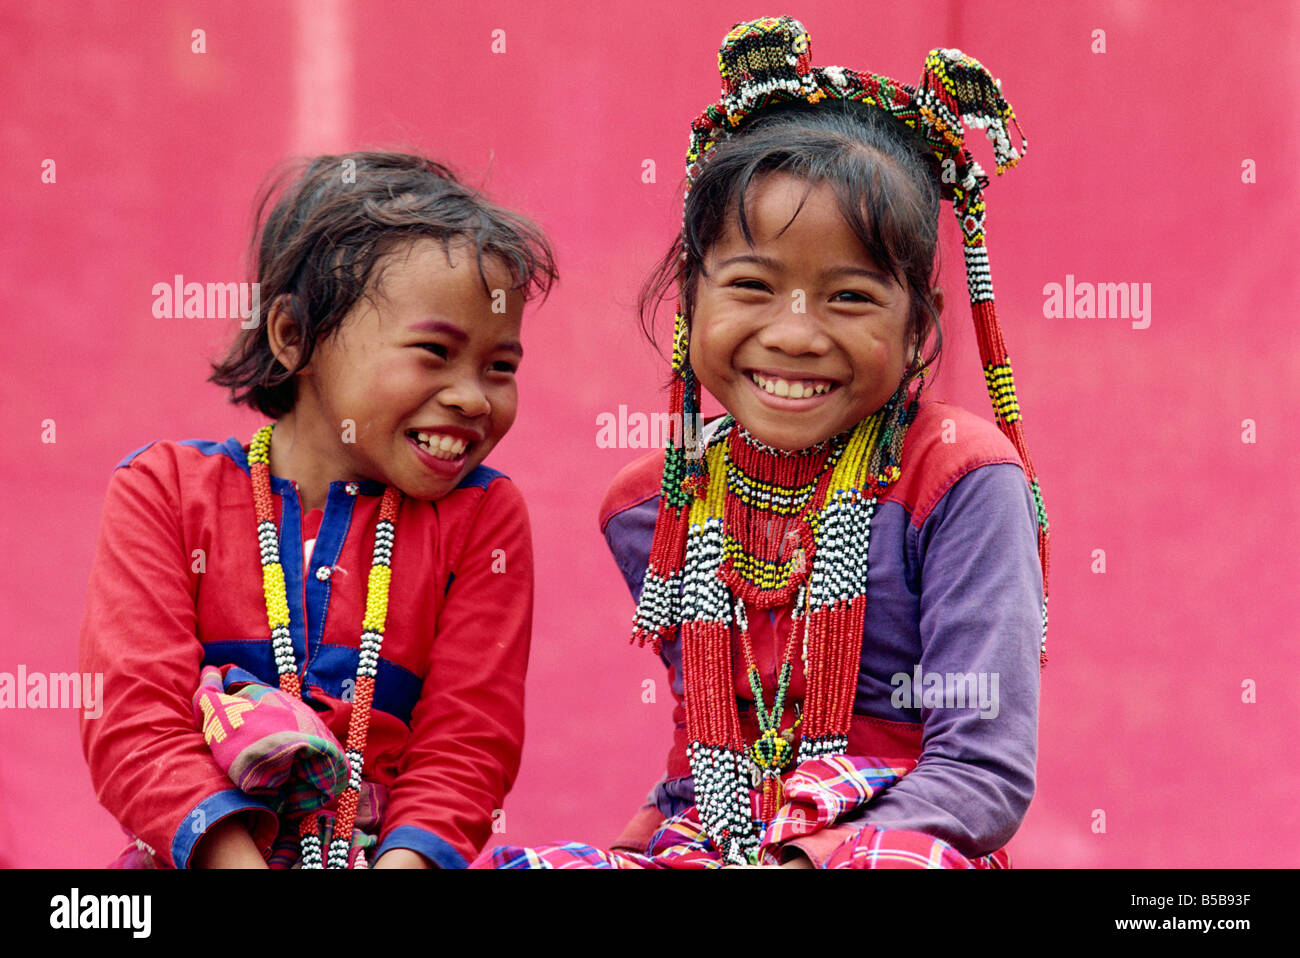 Portrait of two smiling children of the Kalagan tribe famous for Eric an ethnic dance of joy and happiness at Cotabato on Stock Photo